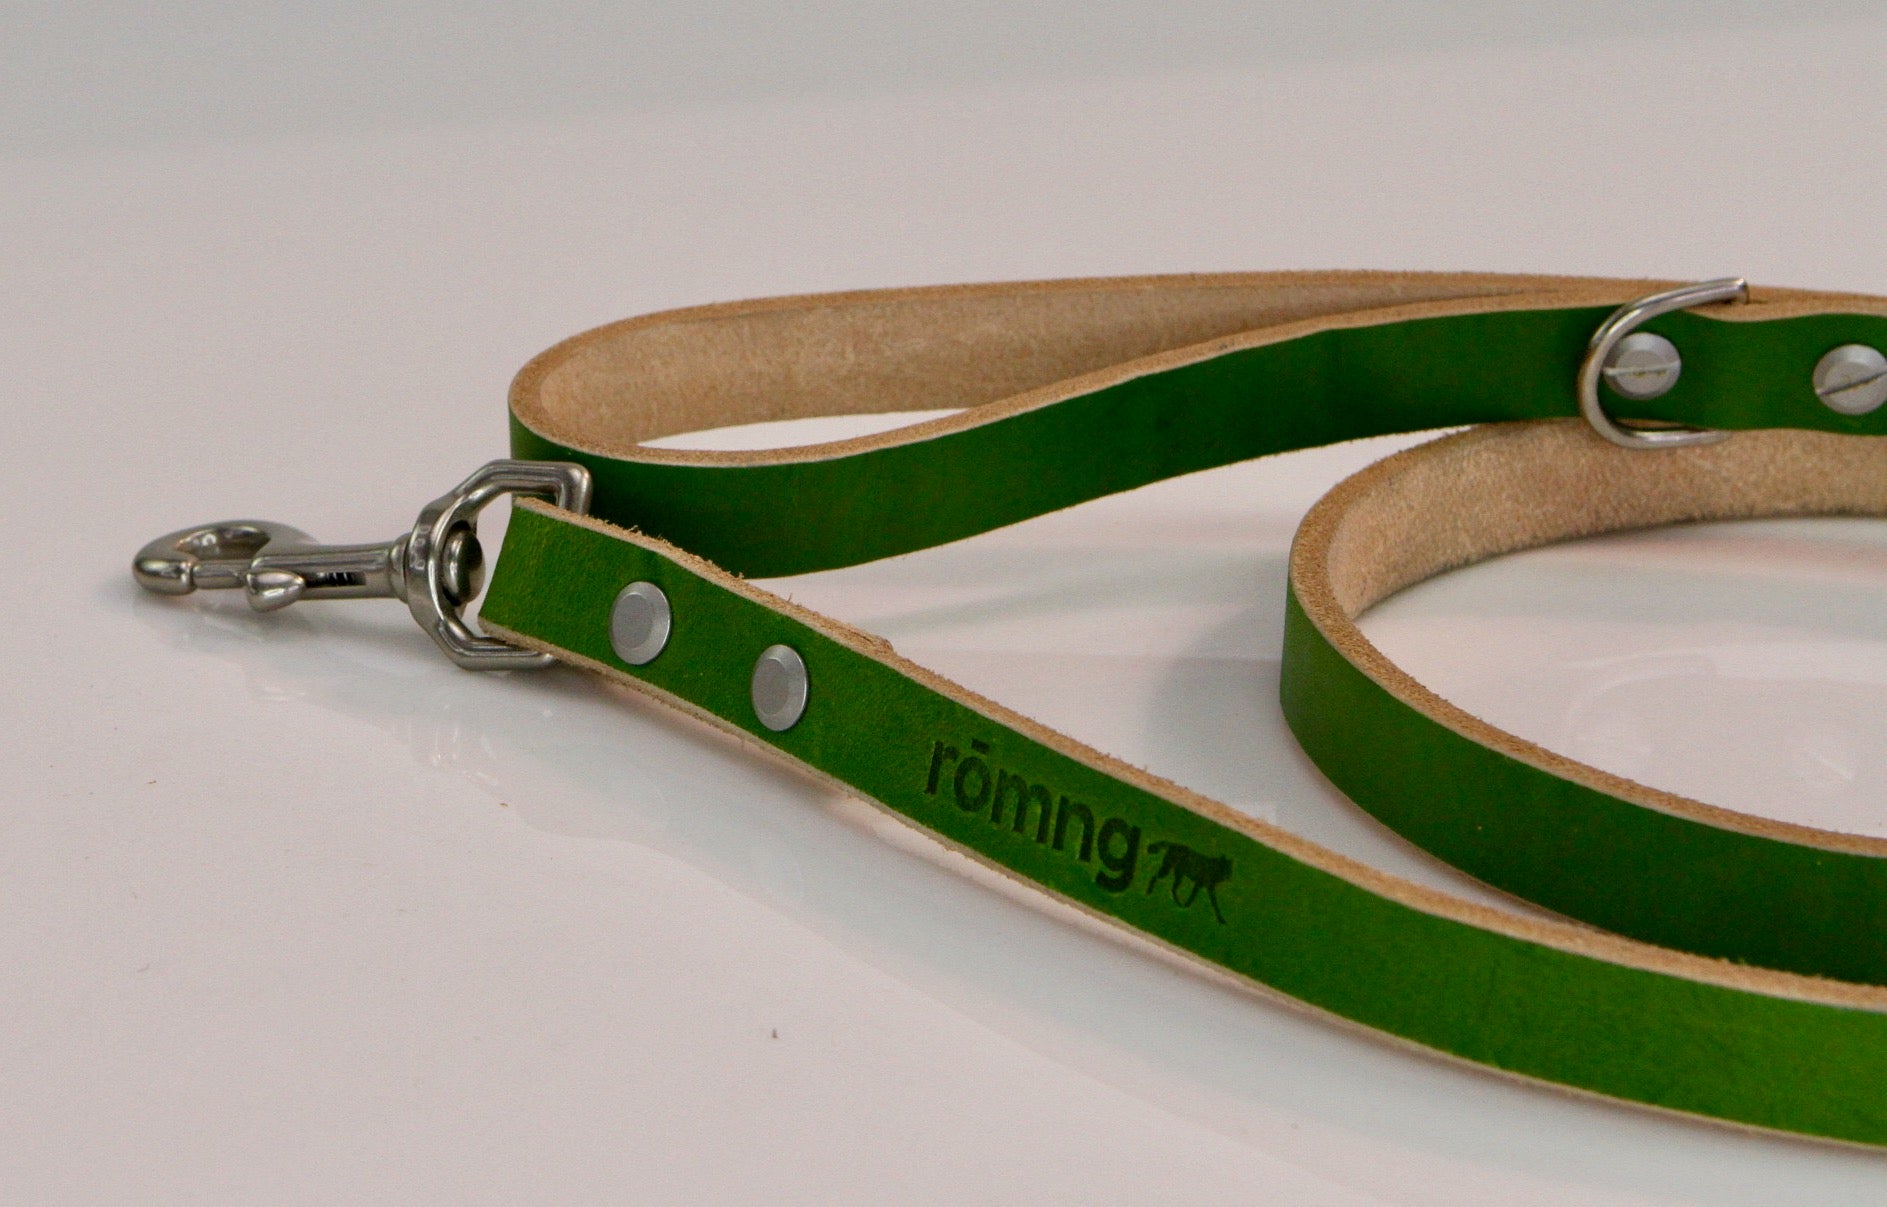 genuine leather leashes with 90 compostable bags and bag dispenser - rōmng